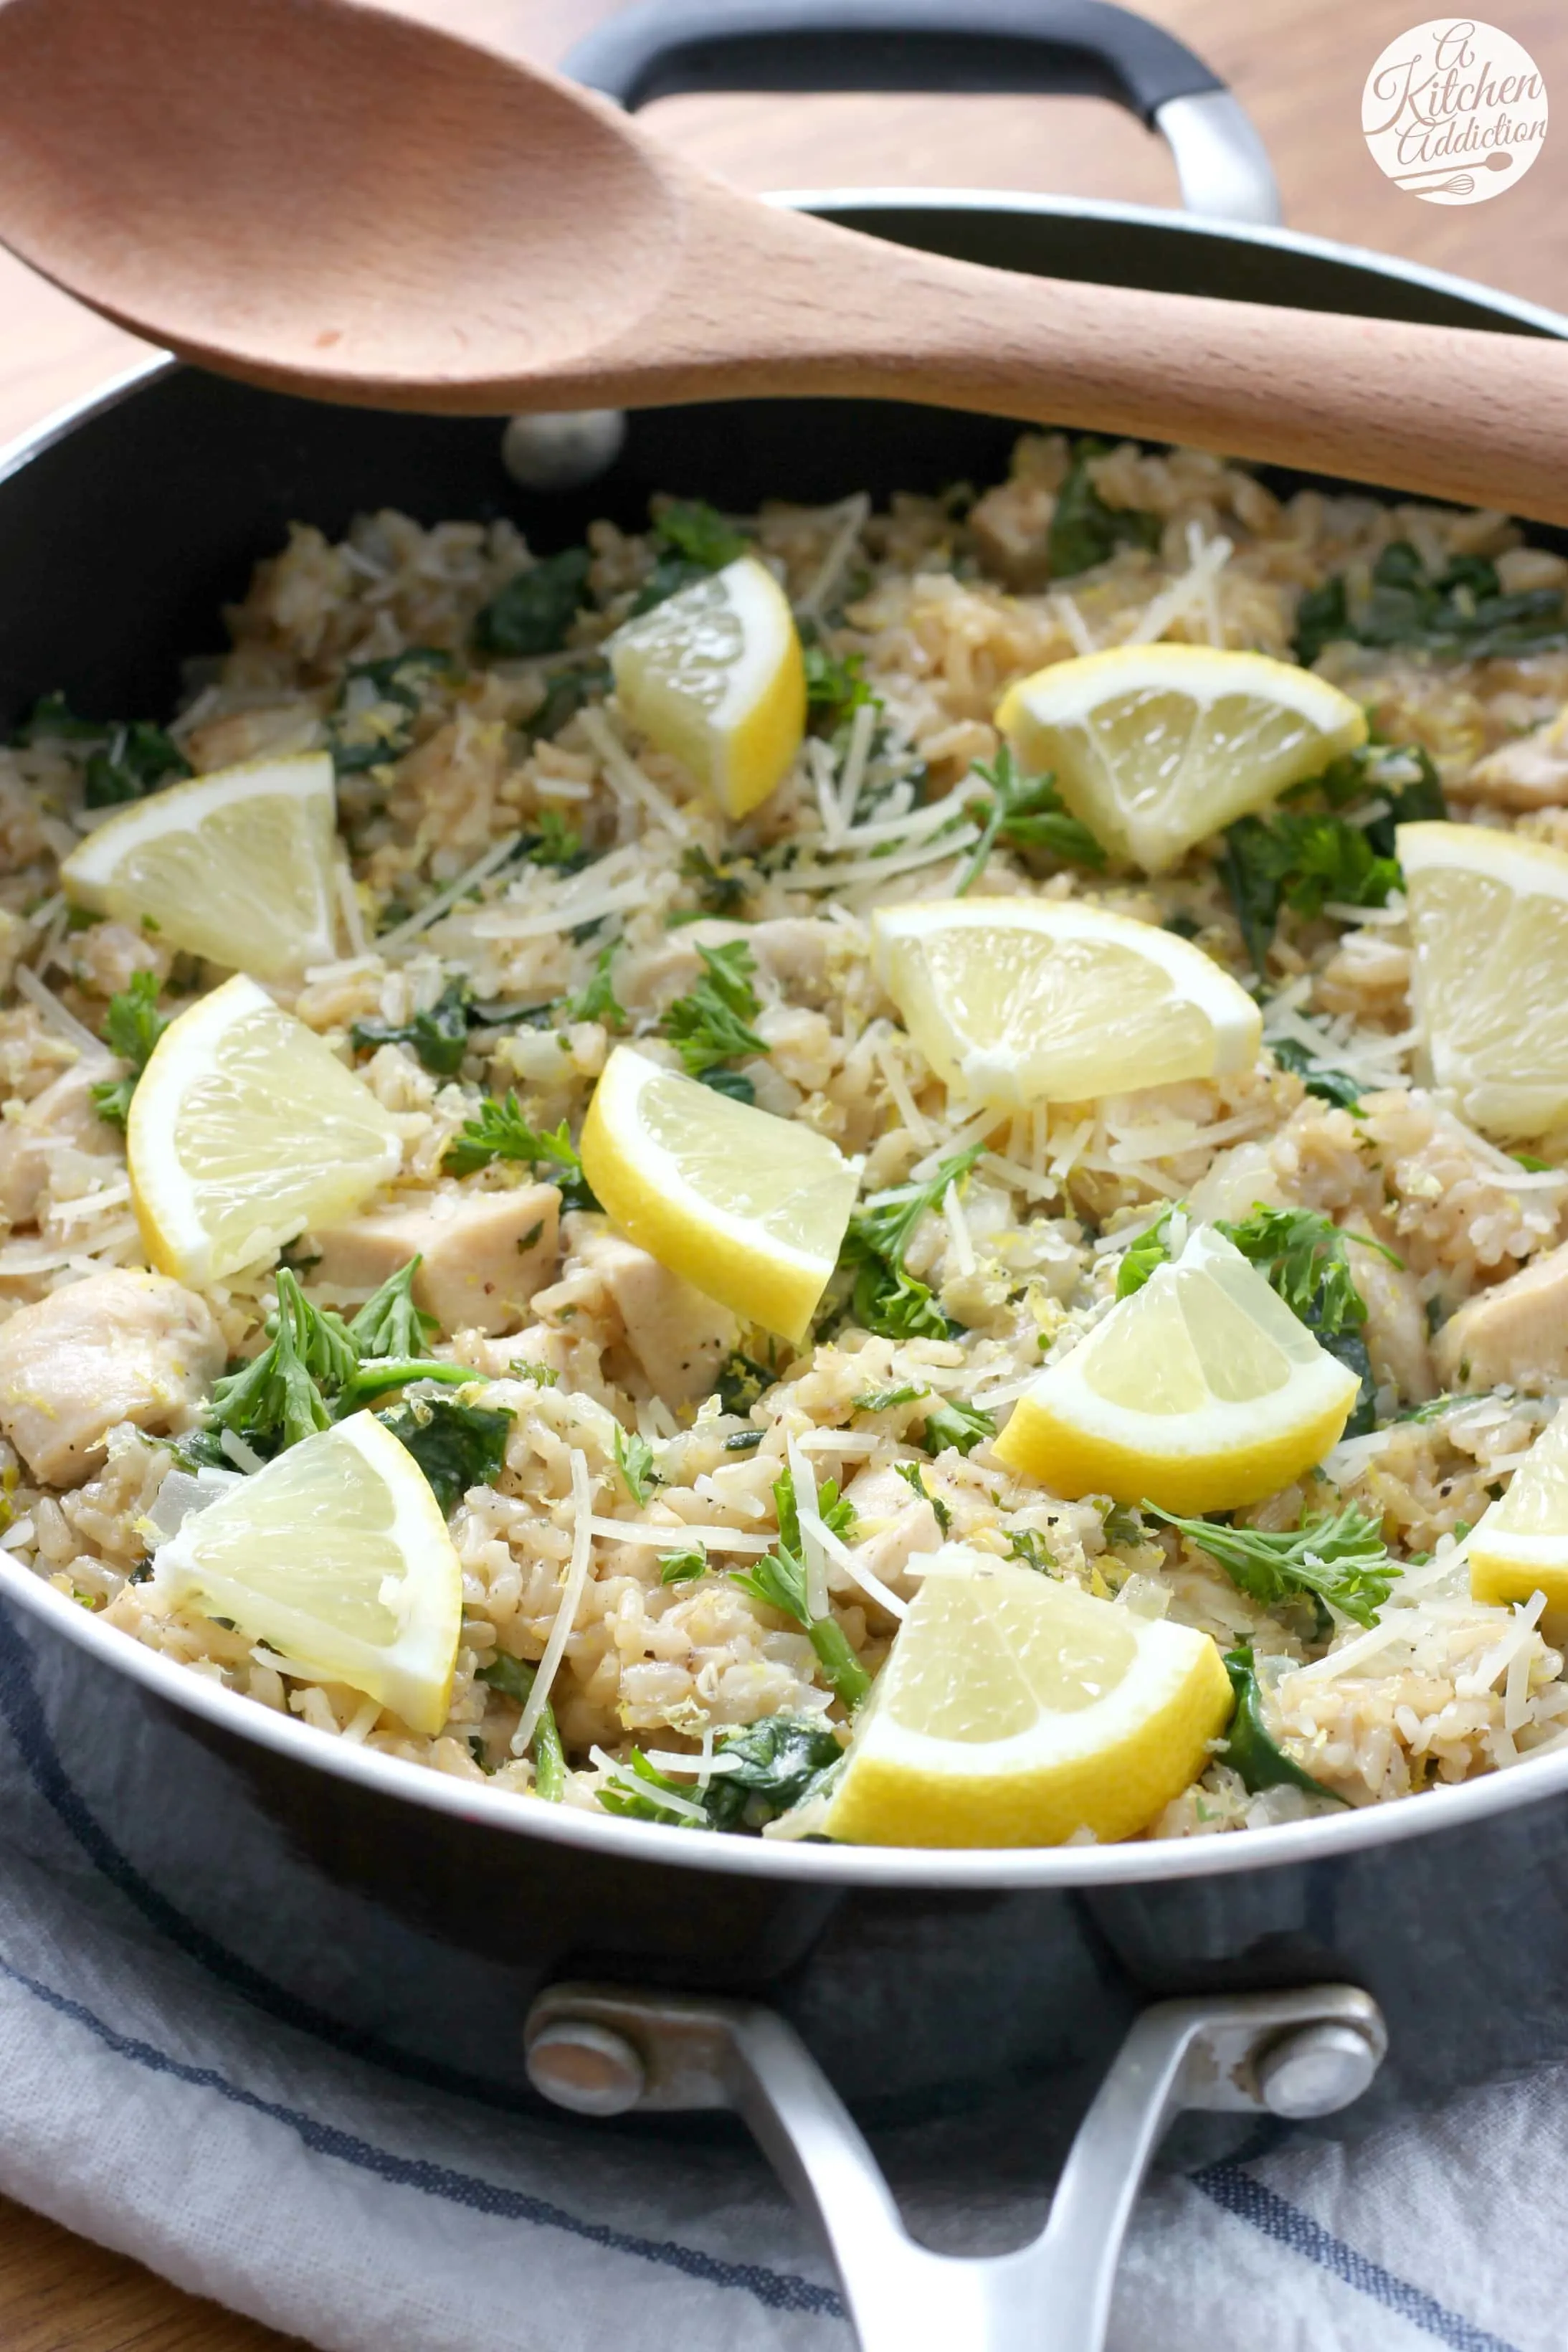 20 Minute Lemon Parmesan Chicken and Rice Skillet Recipe from A Kitchen Addiction